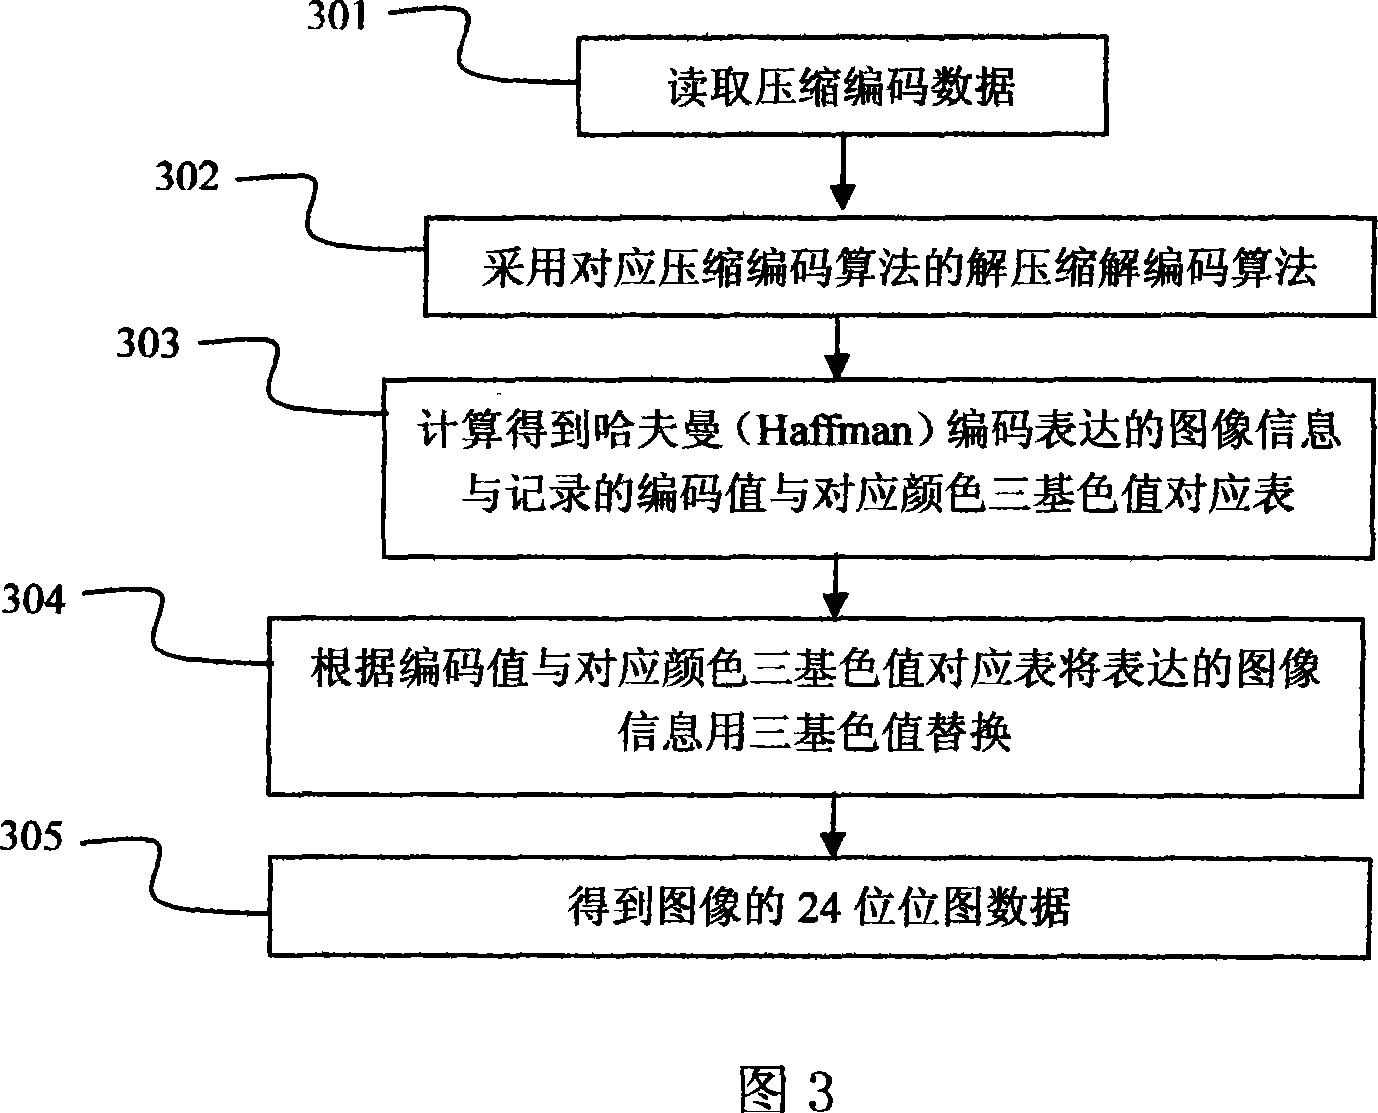 Image coding and decoding processing method based on picture element st atistical characteristic and visual characteristic